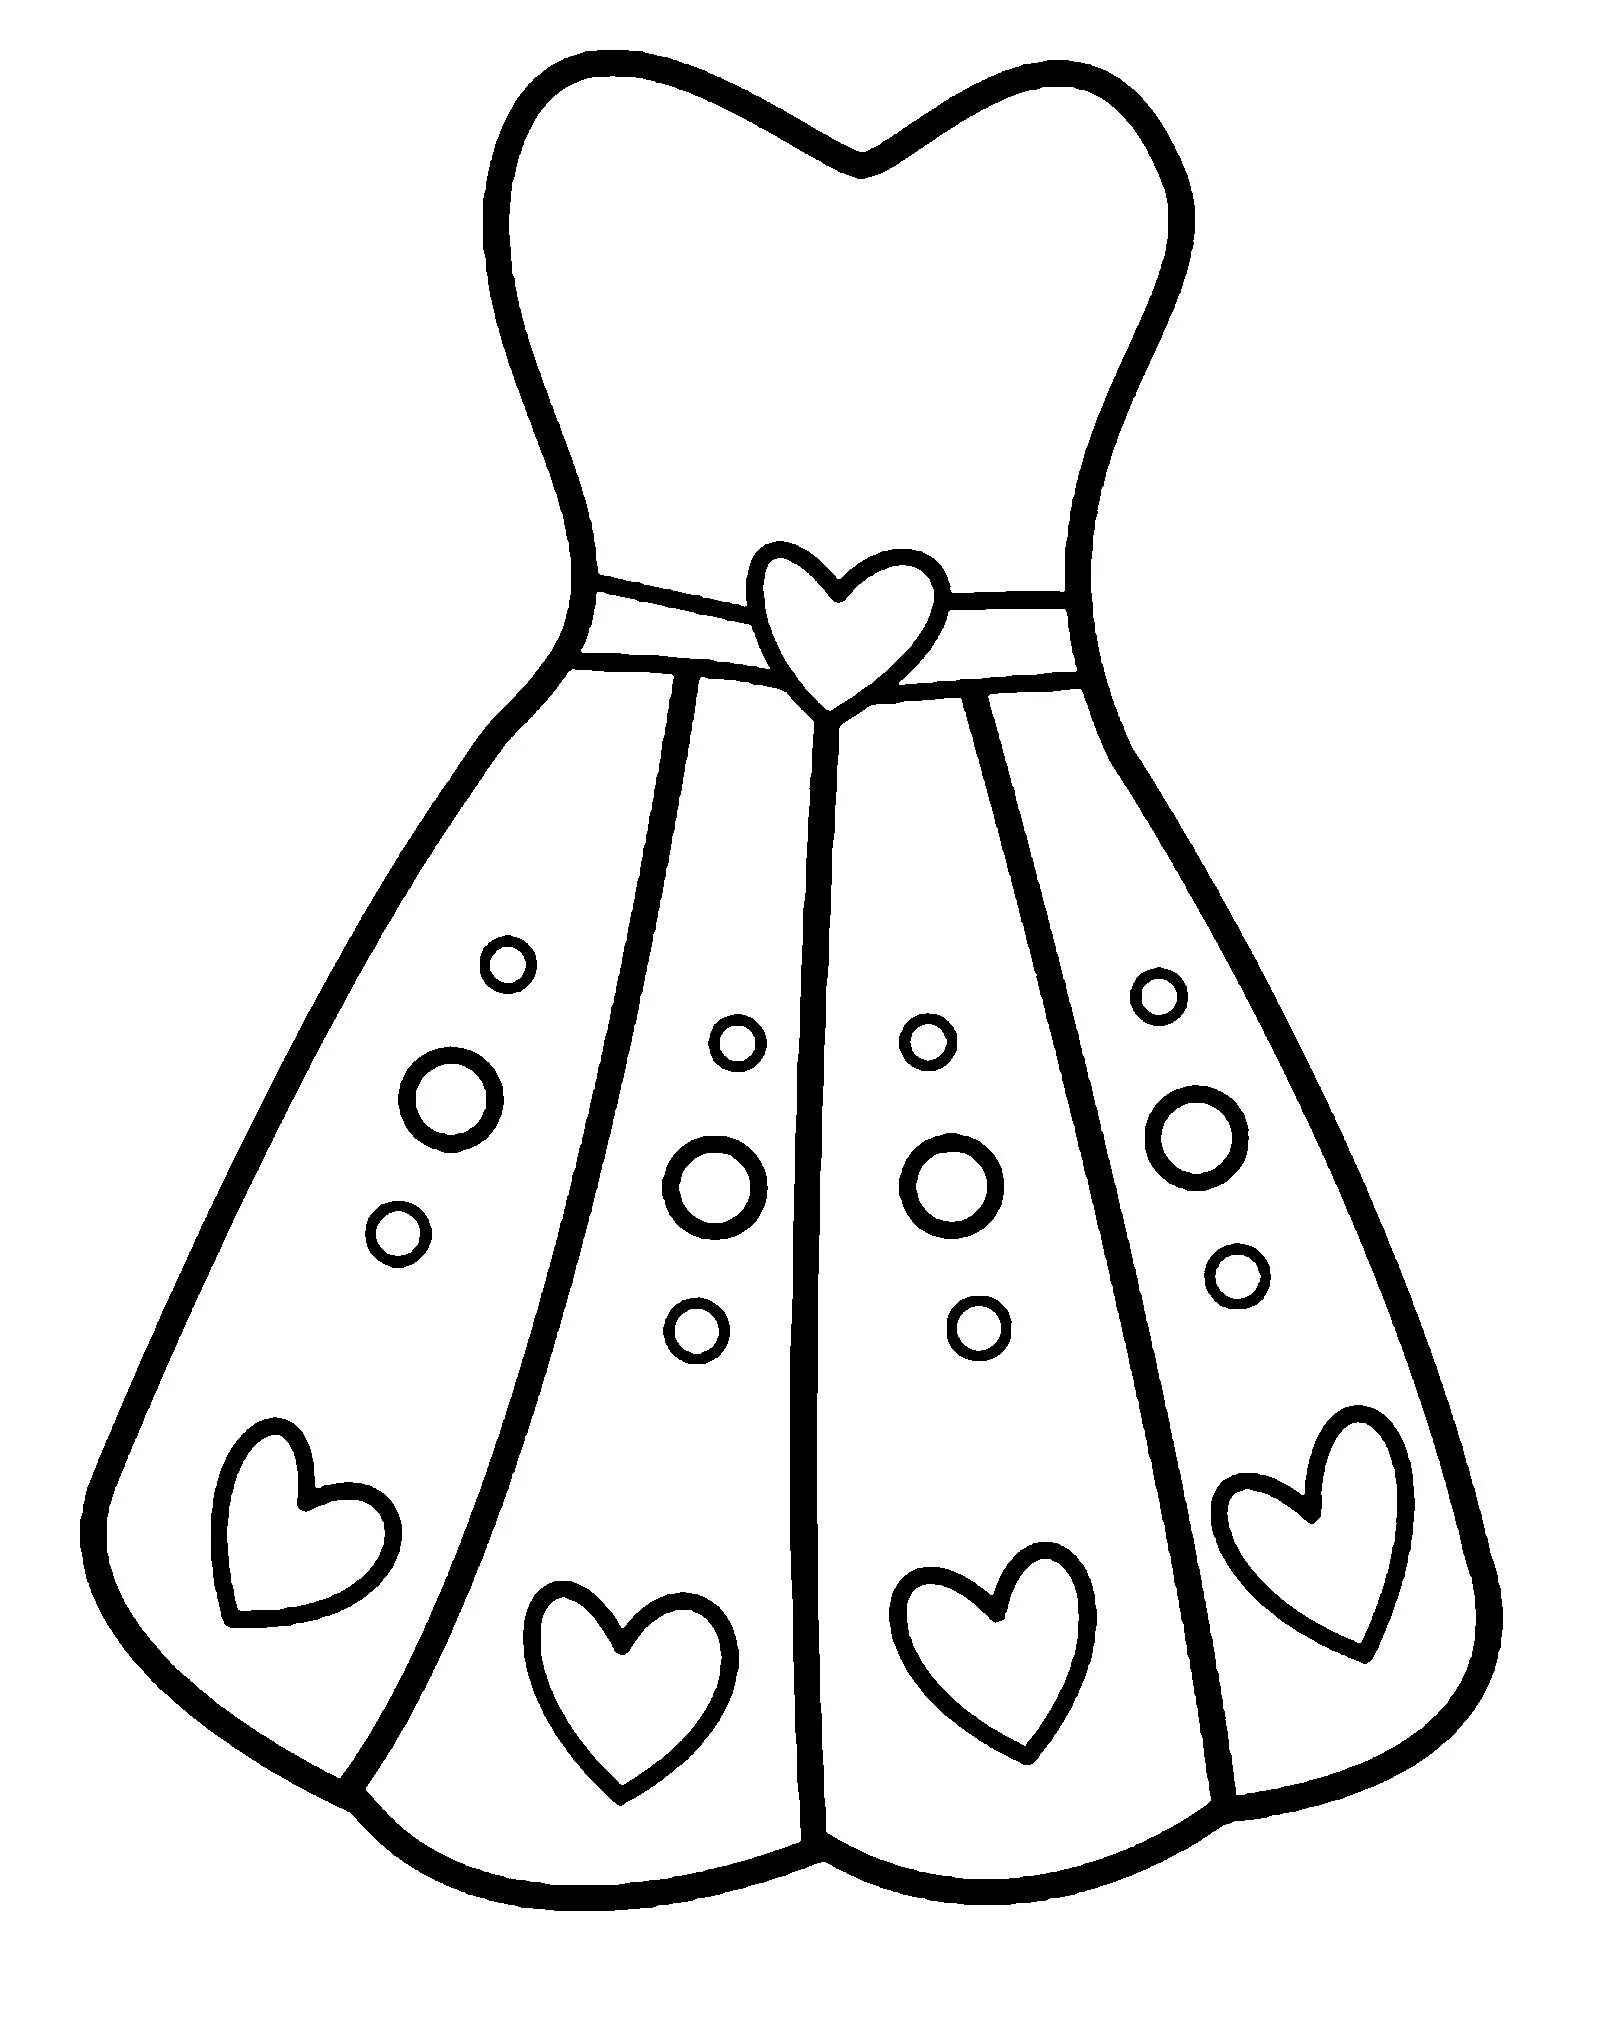 Hypnotic dress coloring page for children 5-6 years old